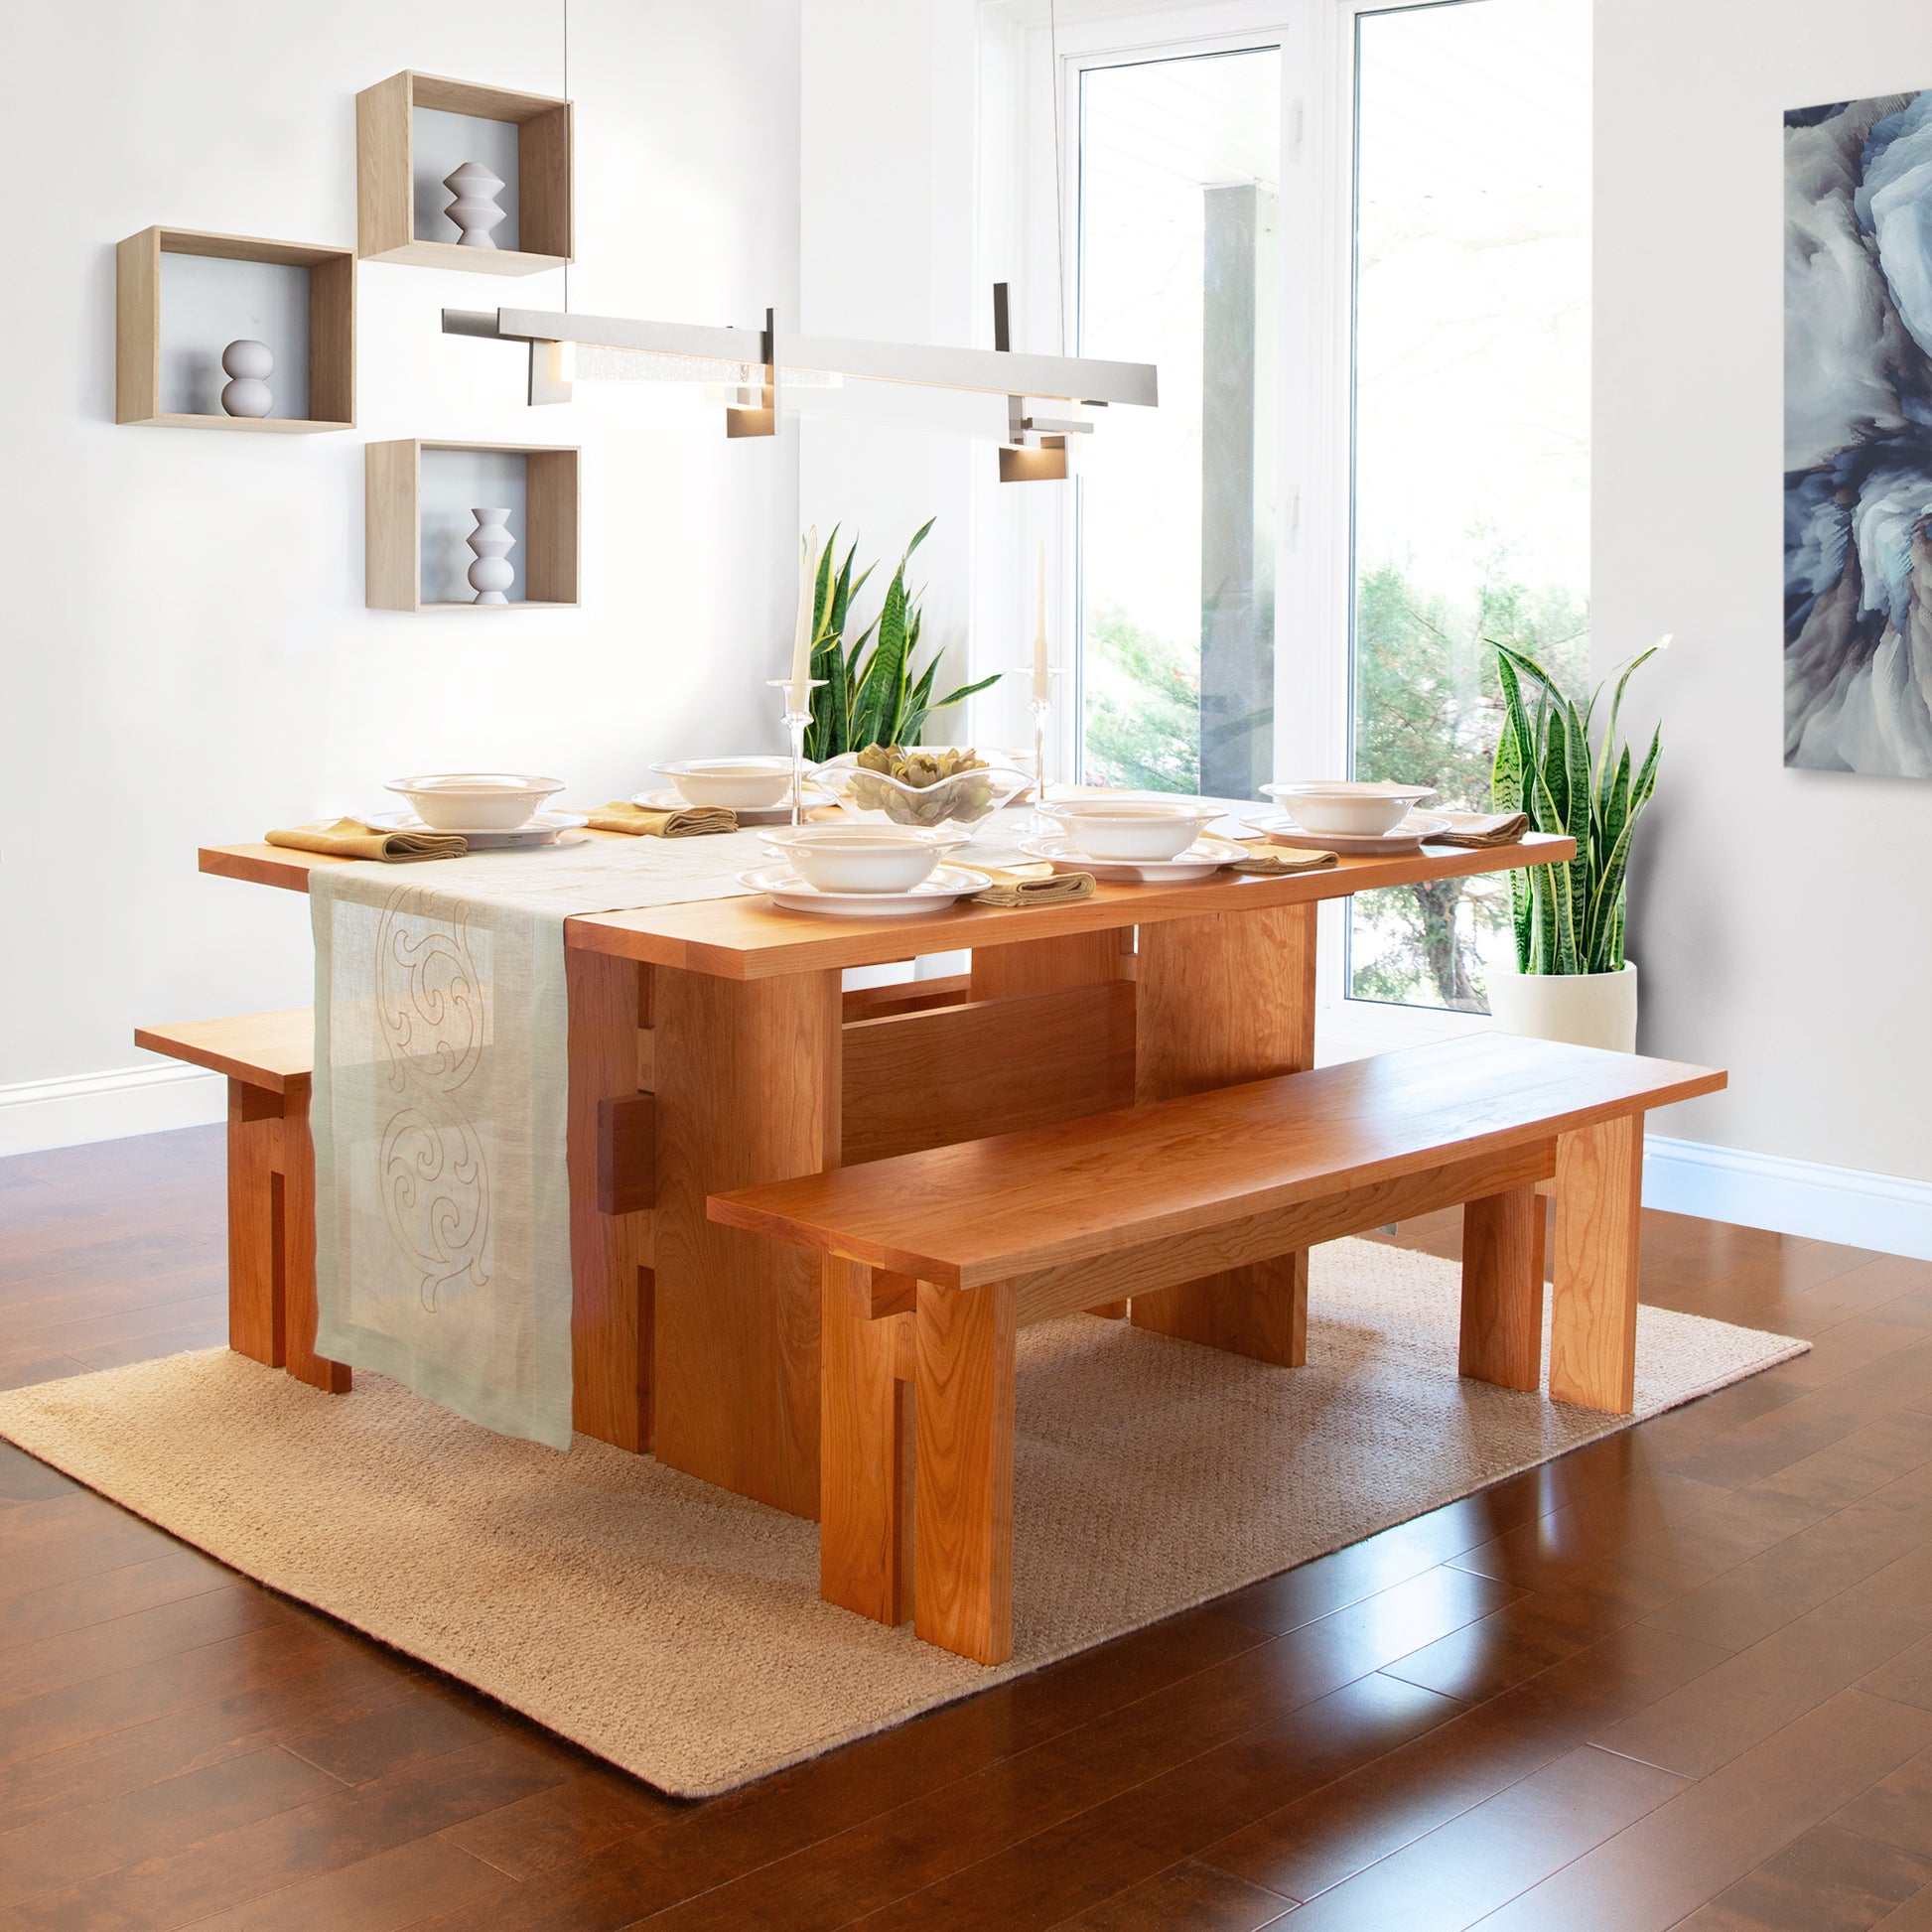 Modern Vermont Furniture Designs American dining room with a solid wood Modern American Dining Table set for a meal, benches, pendant lights, and decorative plants.